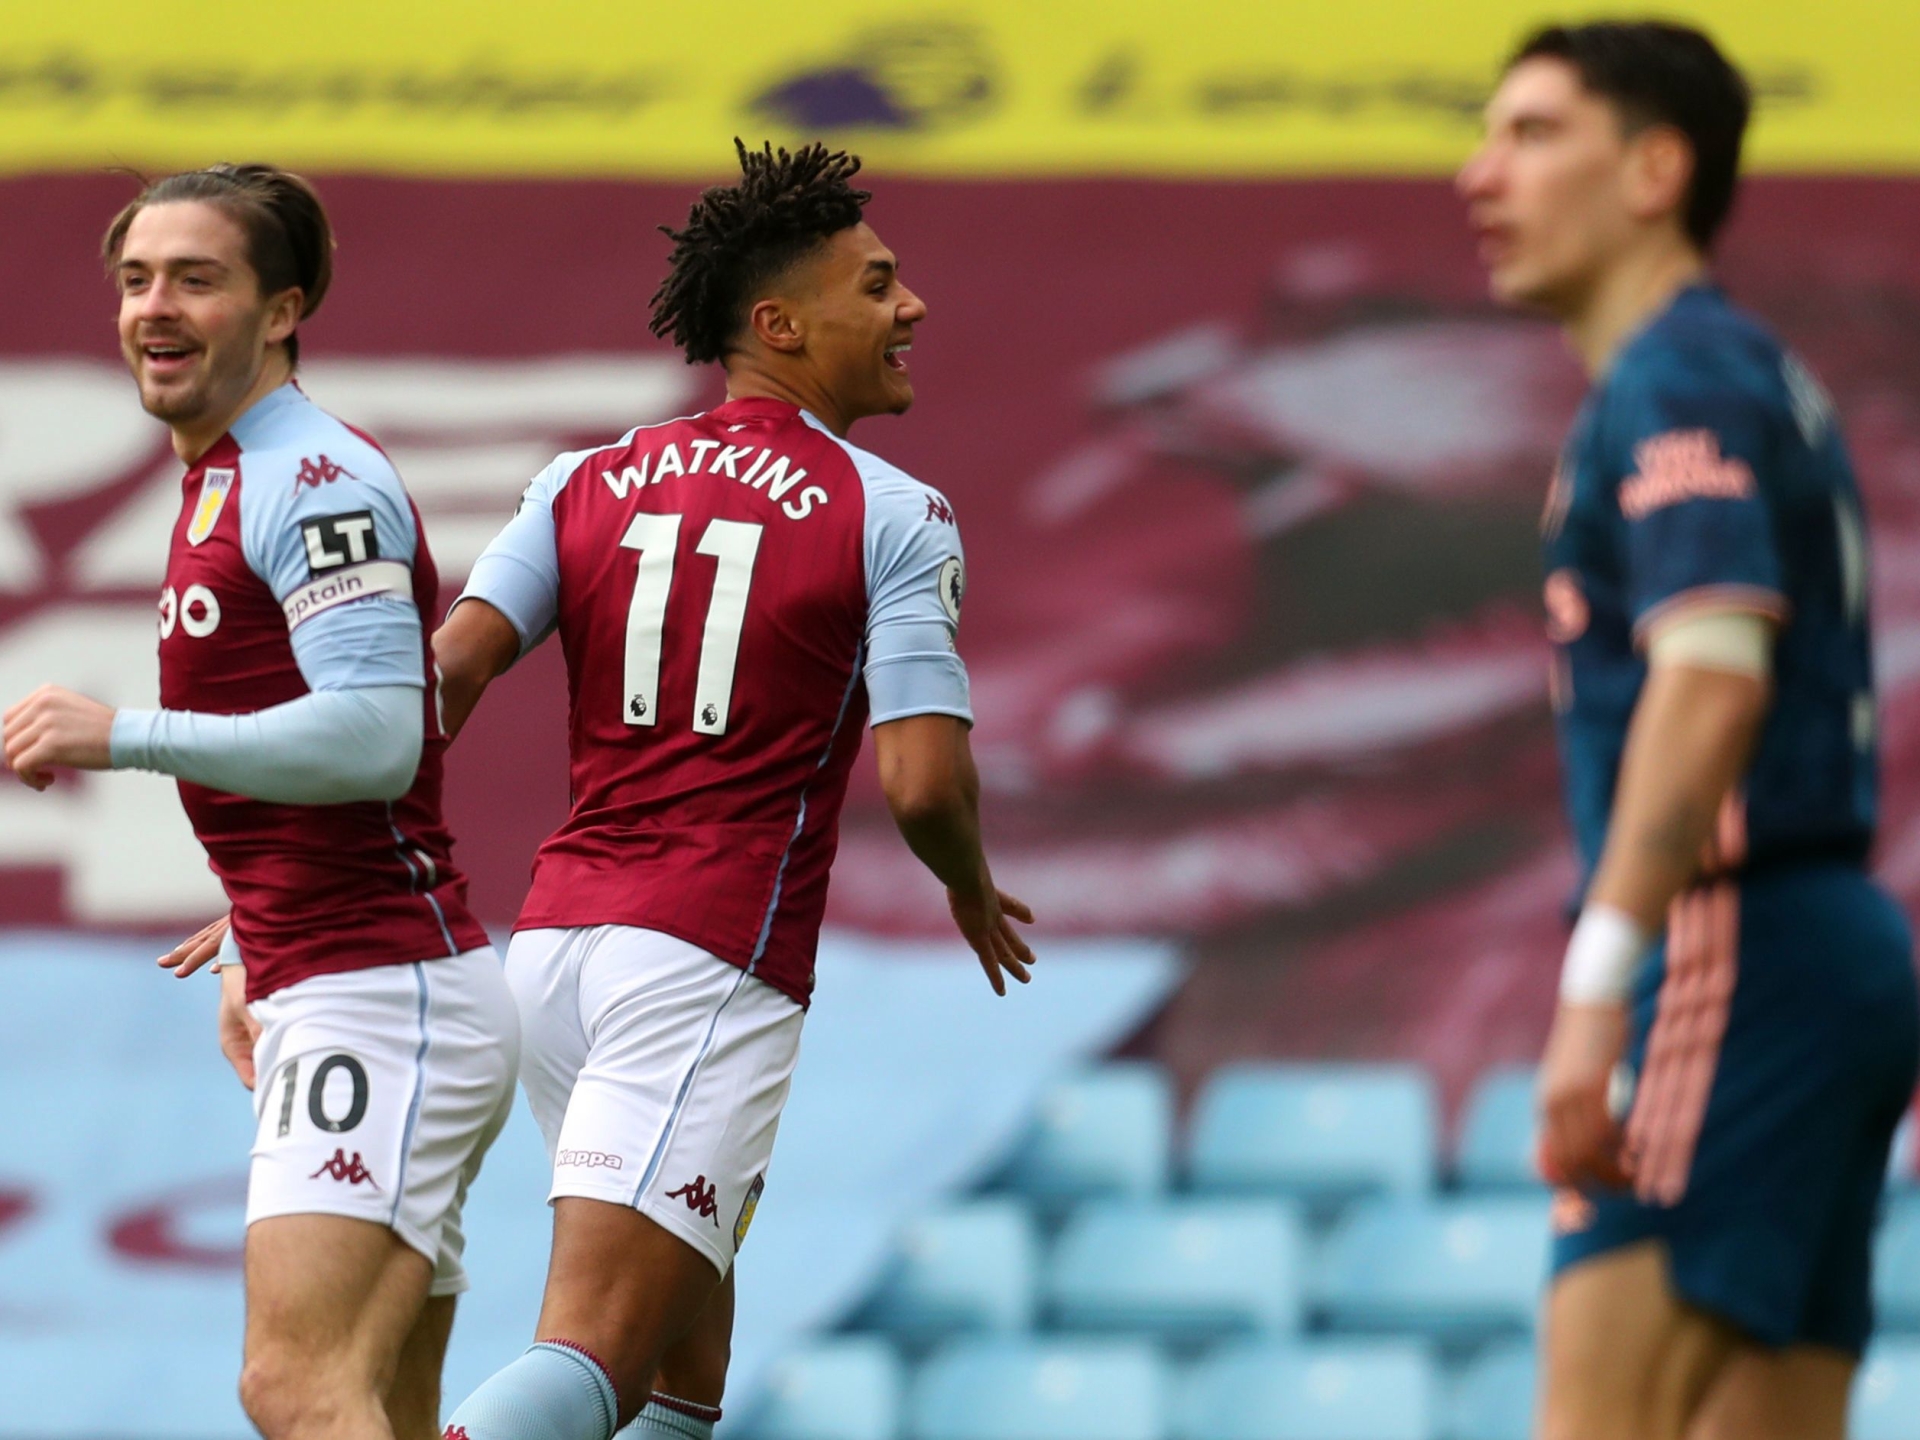 Villa star Ollie Watkins reveals 'dream to play for Arsenal' in old interview before scoring against them in Prem. The US Sun